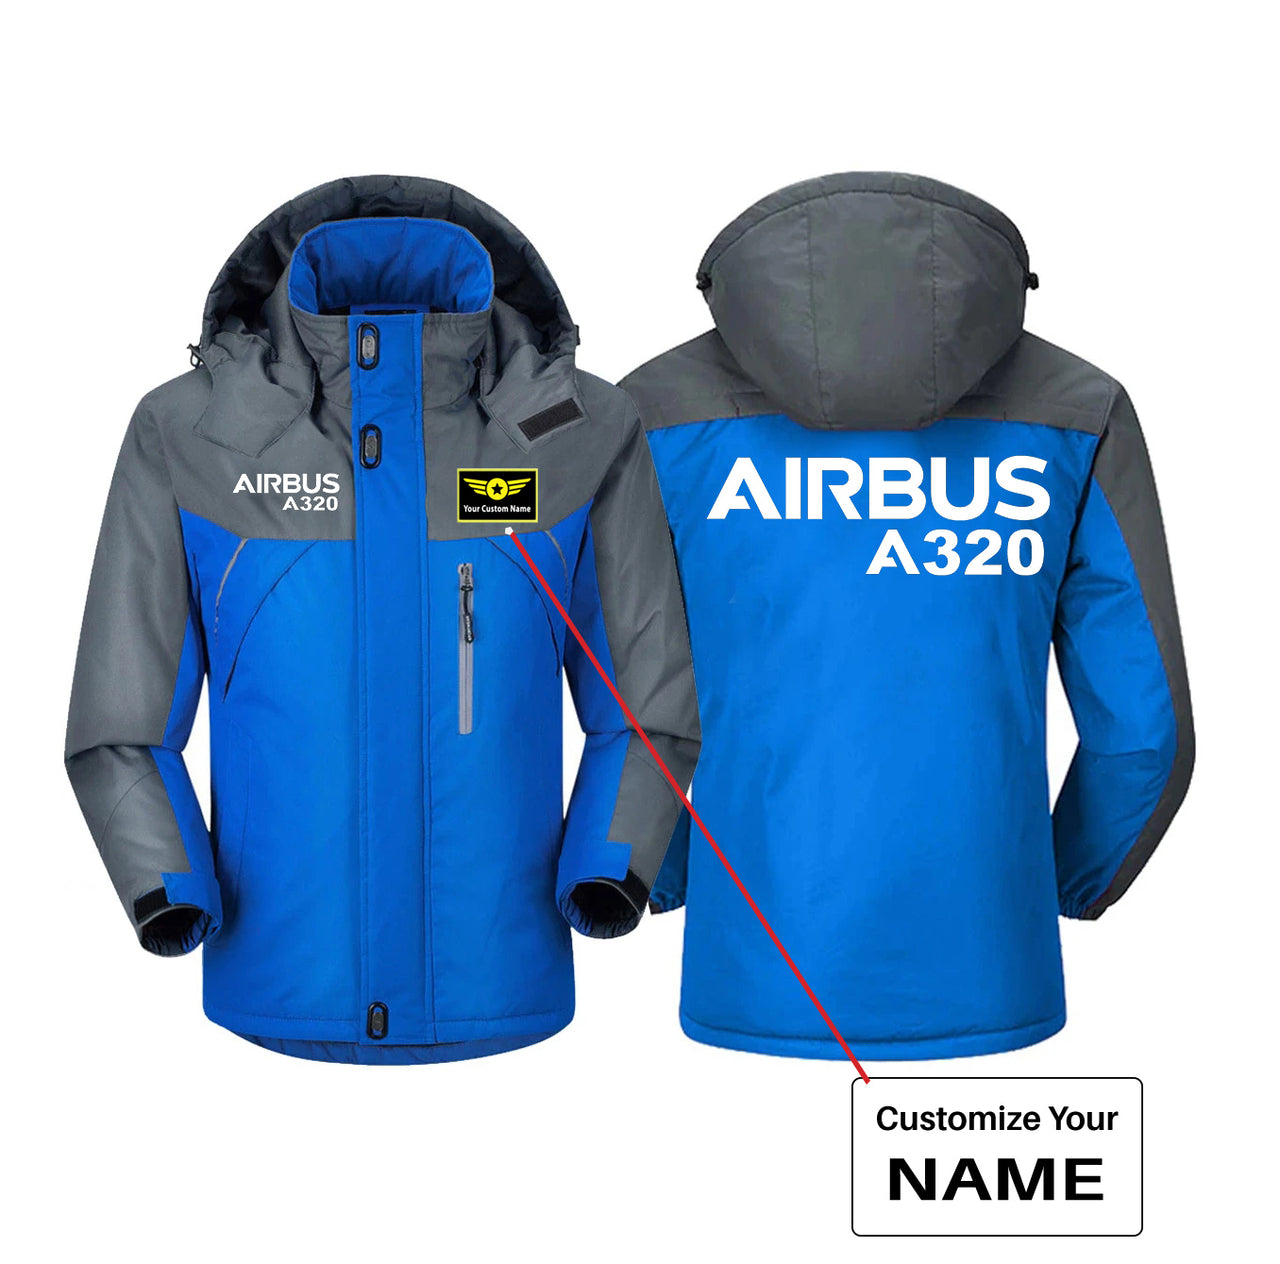 Airbus A320 & Text Designed Thick Winter Jackets